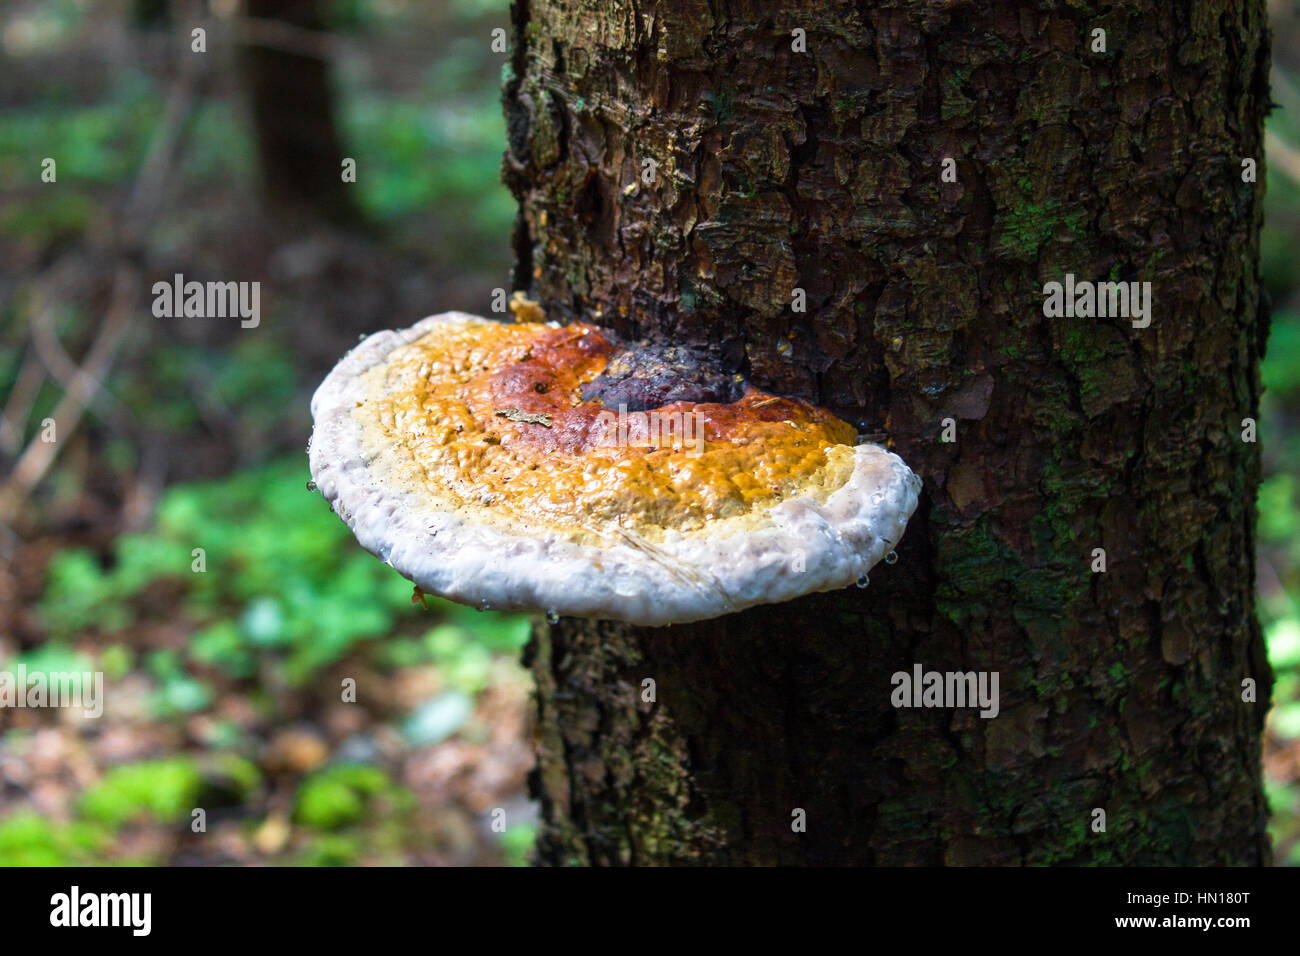 Raincoat umbridae.Mushroom on a moss in the wood. Useful to health and cookery. Stock Photo